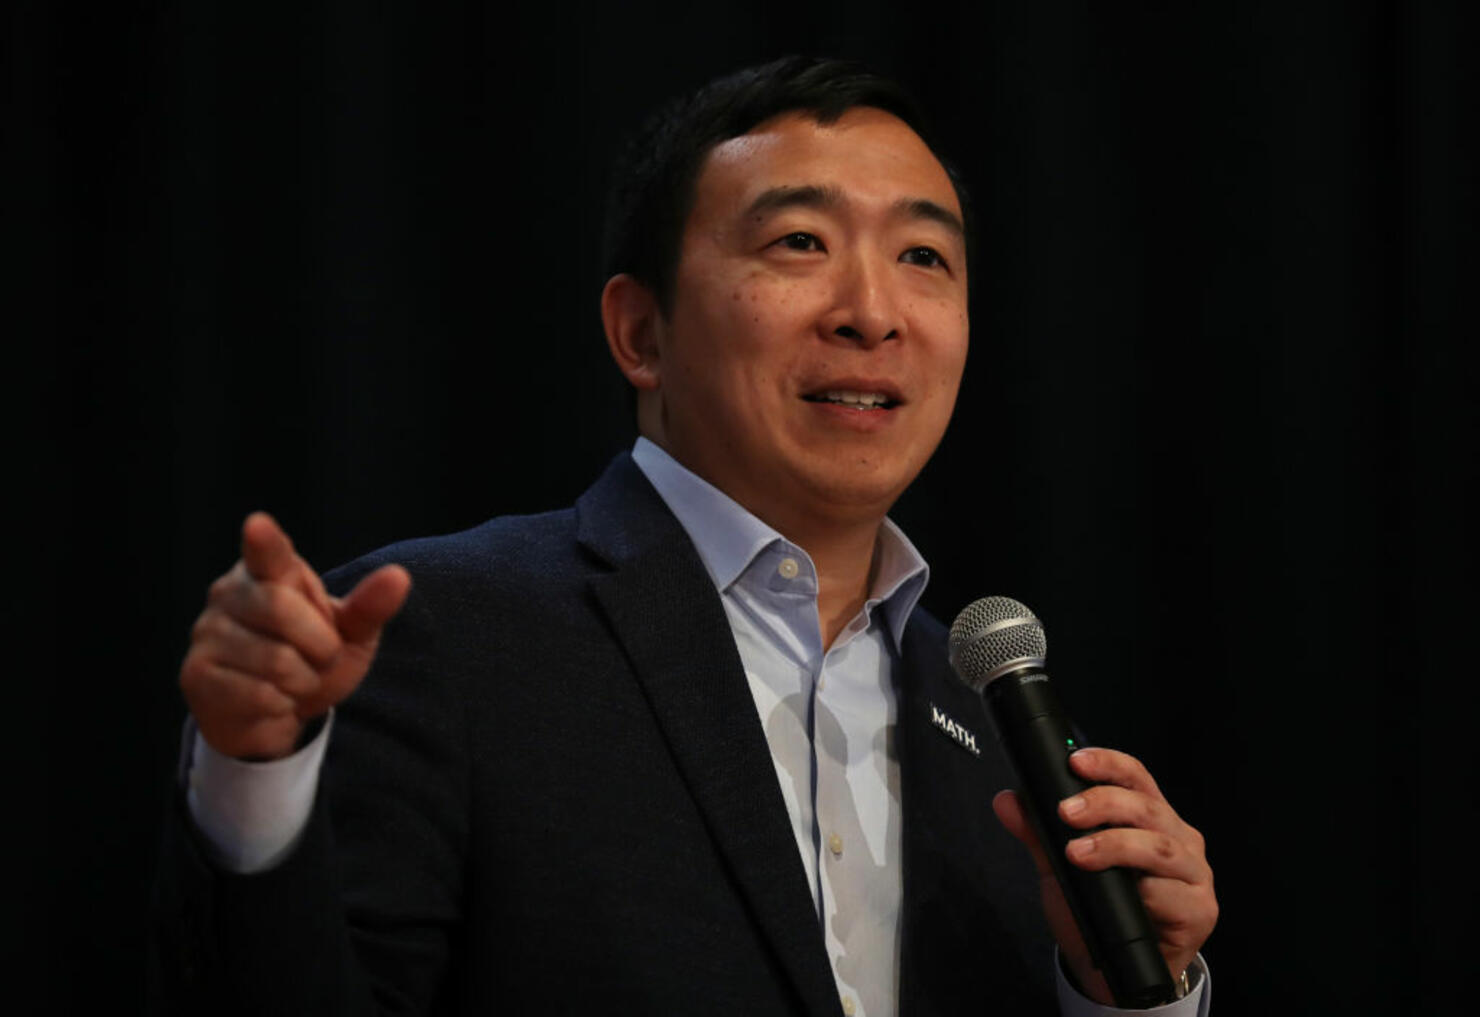 Andrew Yang Campaigns Across New Hampshire Ahead Of Nation's First Primary